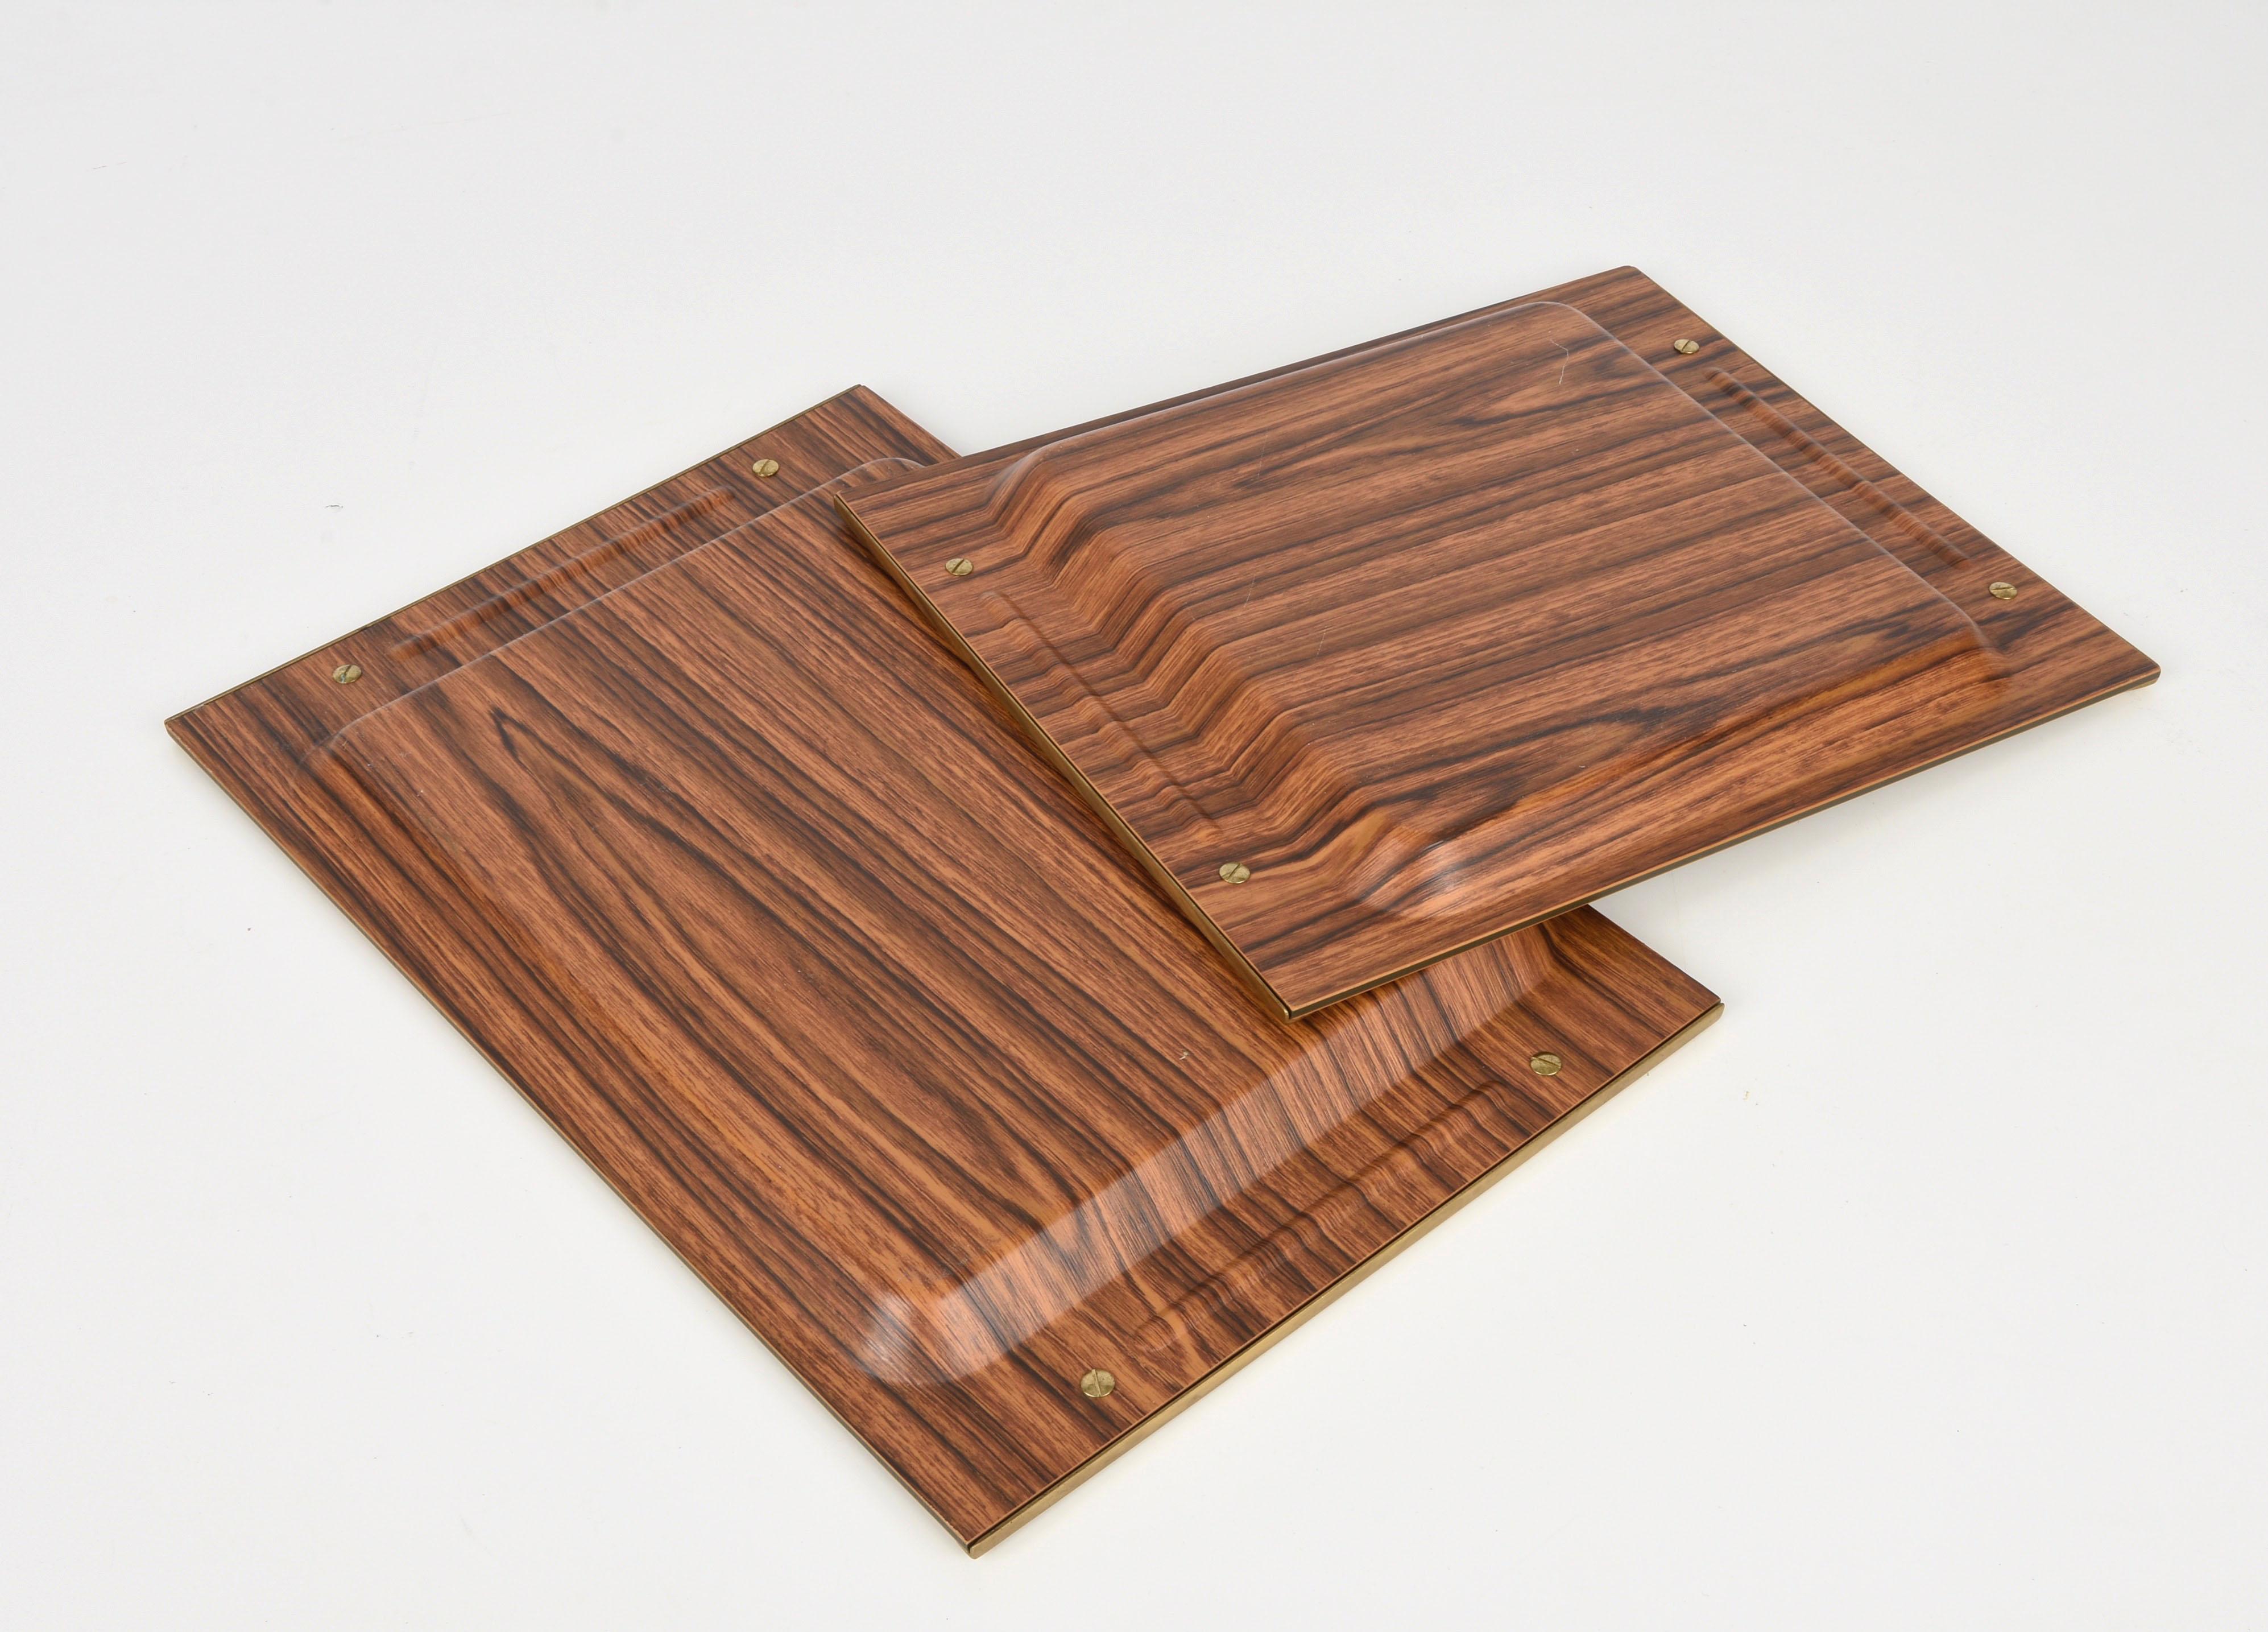  Pair of Midcentury Laminate and Brass Italian Trays Serving Pieces, 1970s For Sale 3